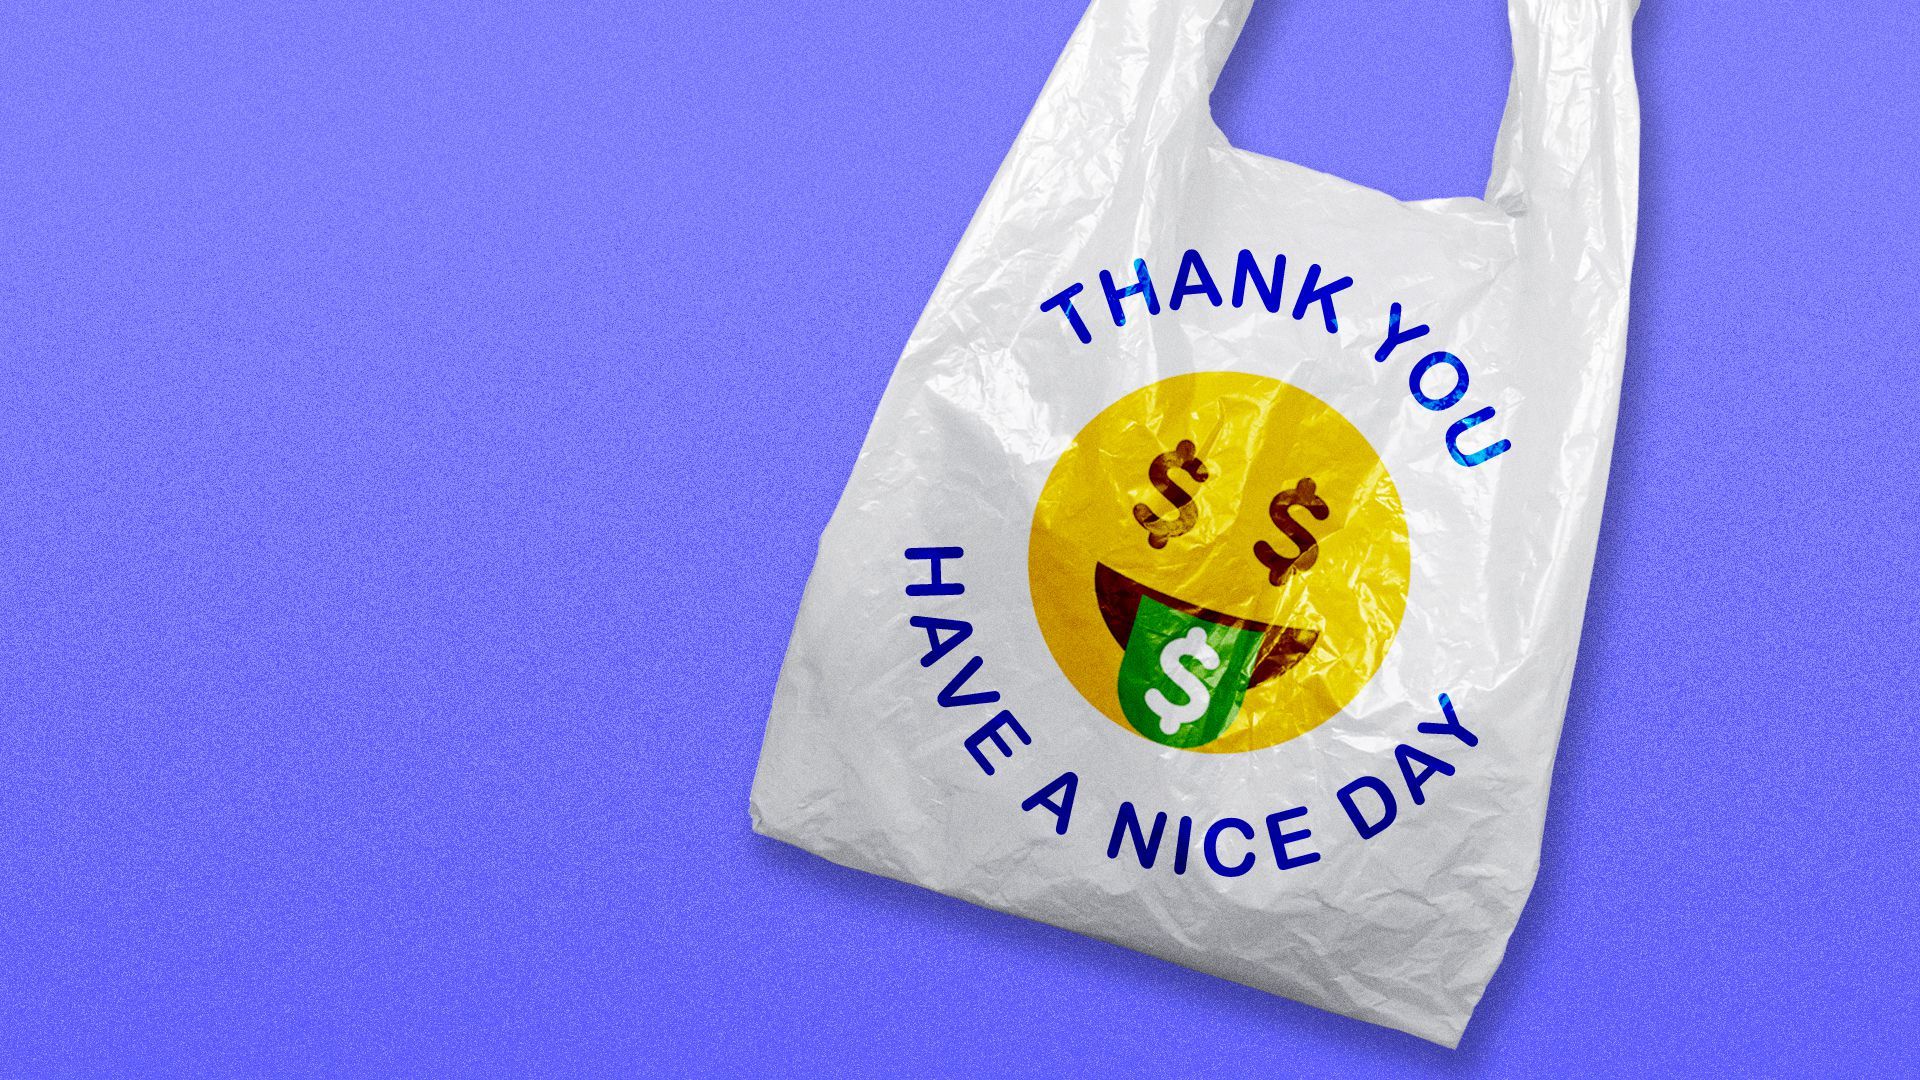 Illustration of a smiley face  plastic bag, but the smiley face is replaced with the money-tongue emoji.